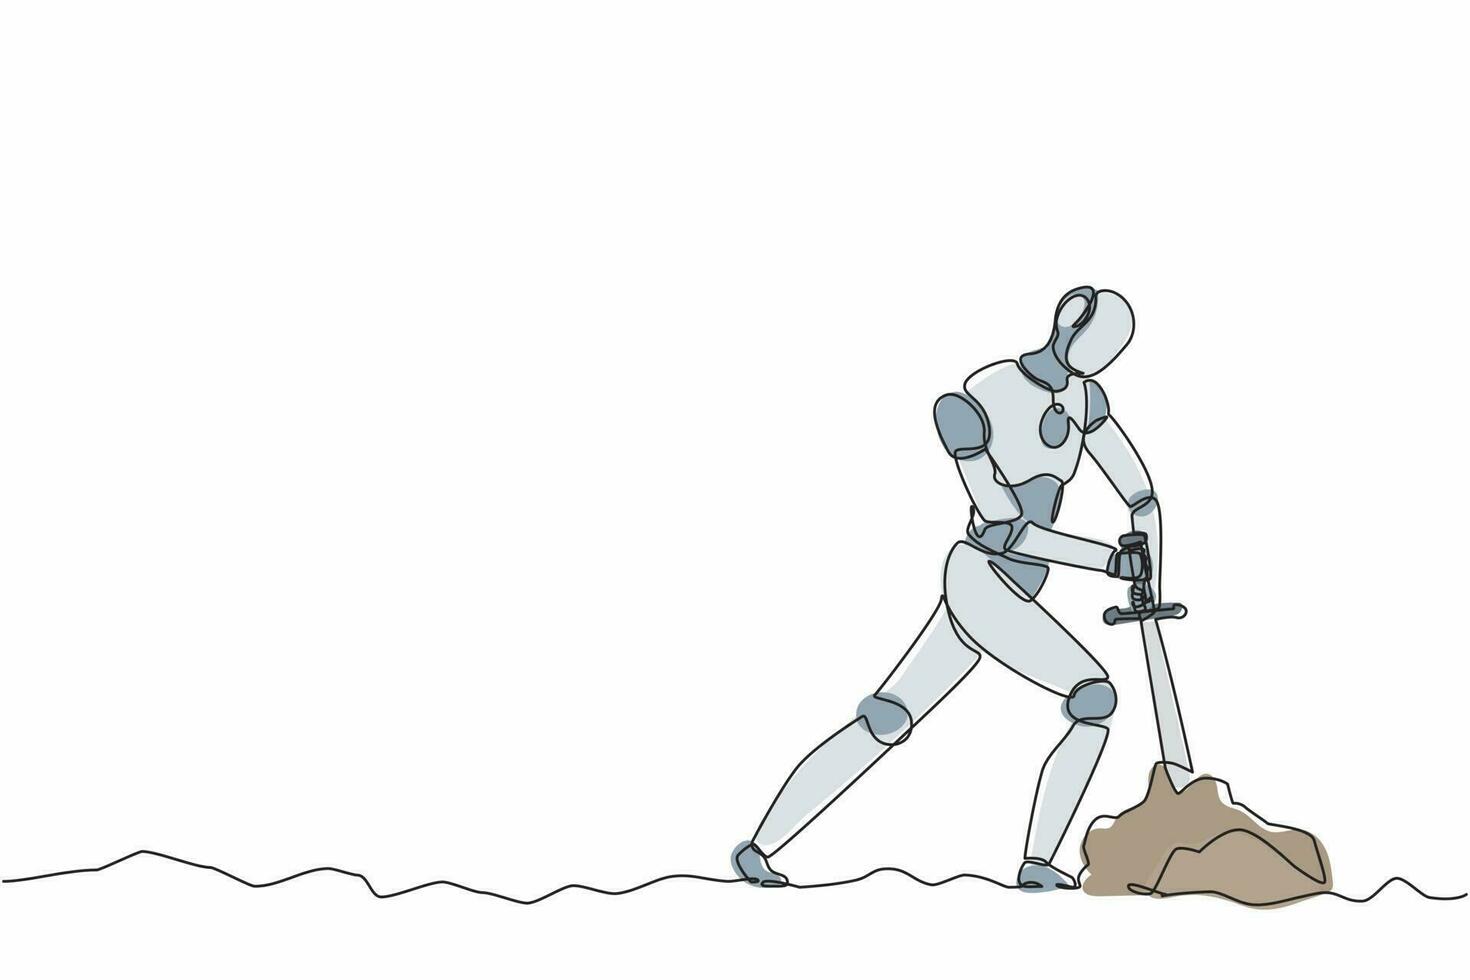 Single one line drawing robot tries to draw stuck excalibur sword from stone. Future technology. Artificial intelligence machine learning process. Continuous line design graphic vector illustration